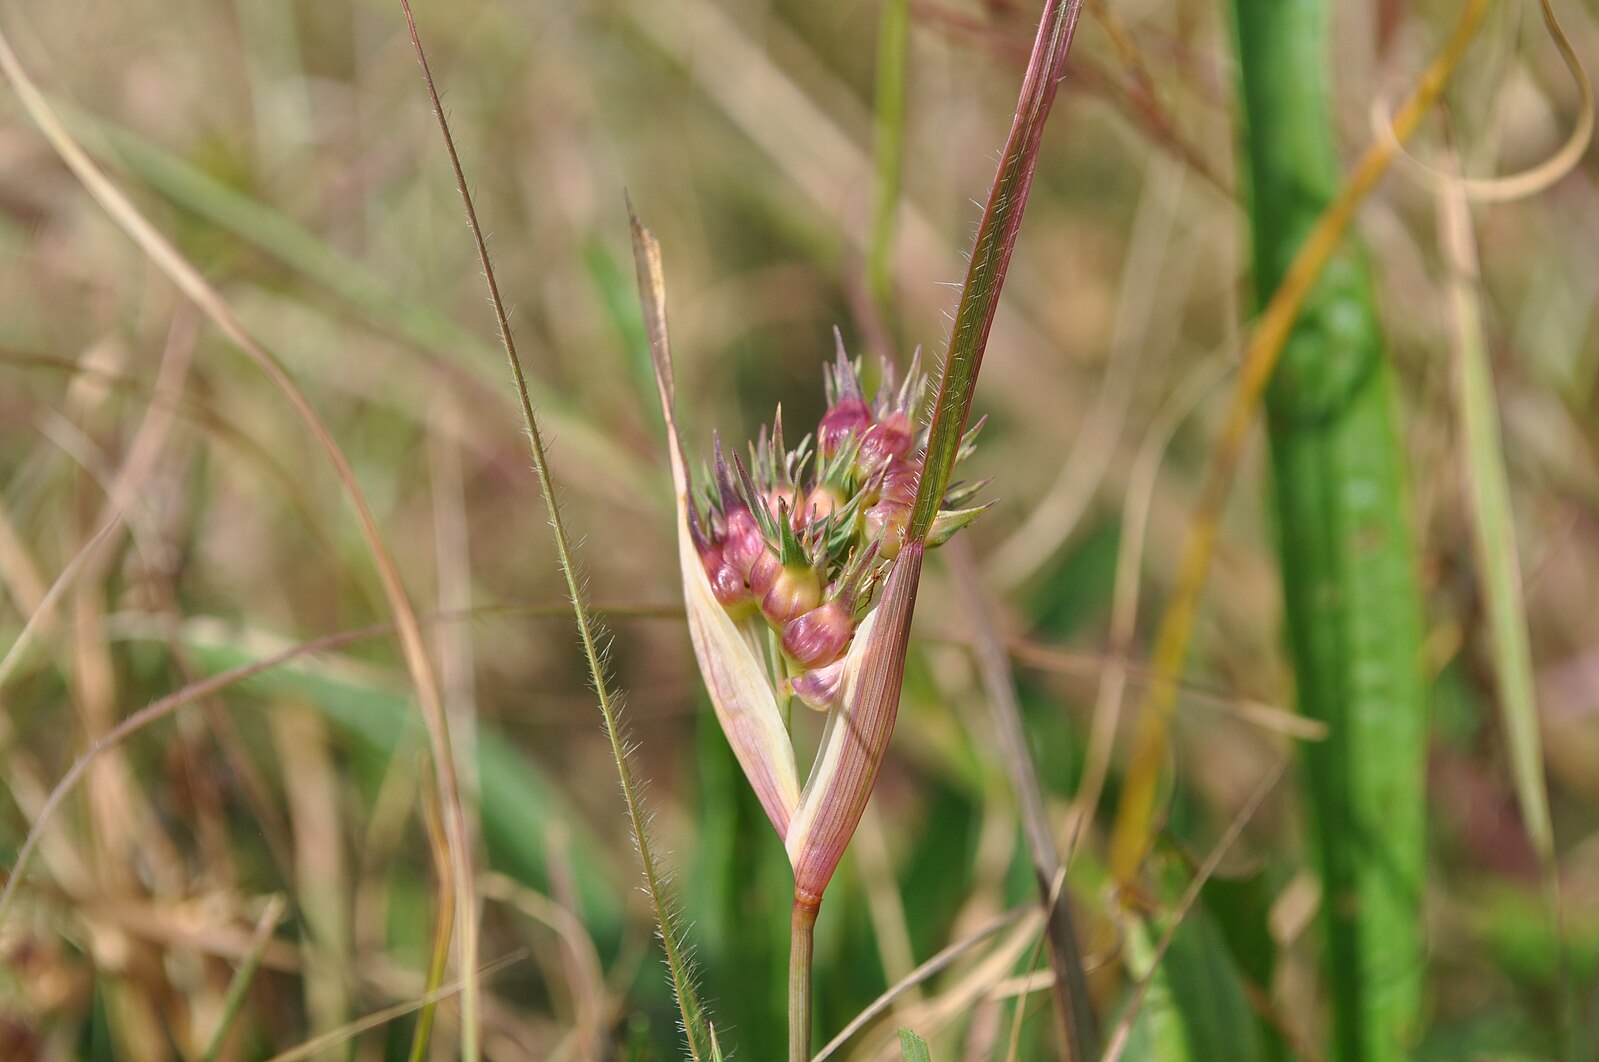 Photograph of a close-up of buffalograss (Bouteloua dactyloides). The photo shows pinkish spikelets and pink-tinged leaves on a stem.